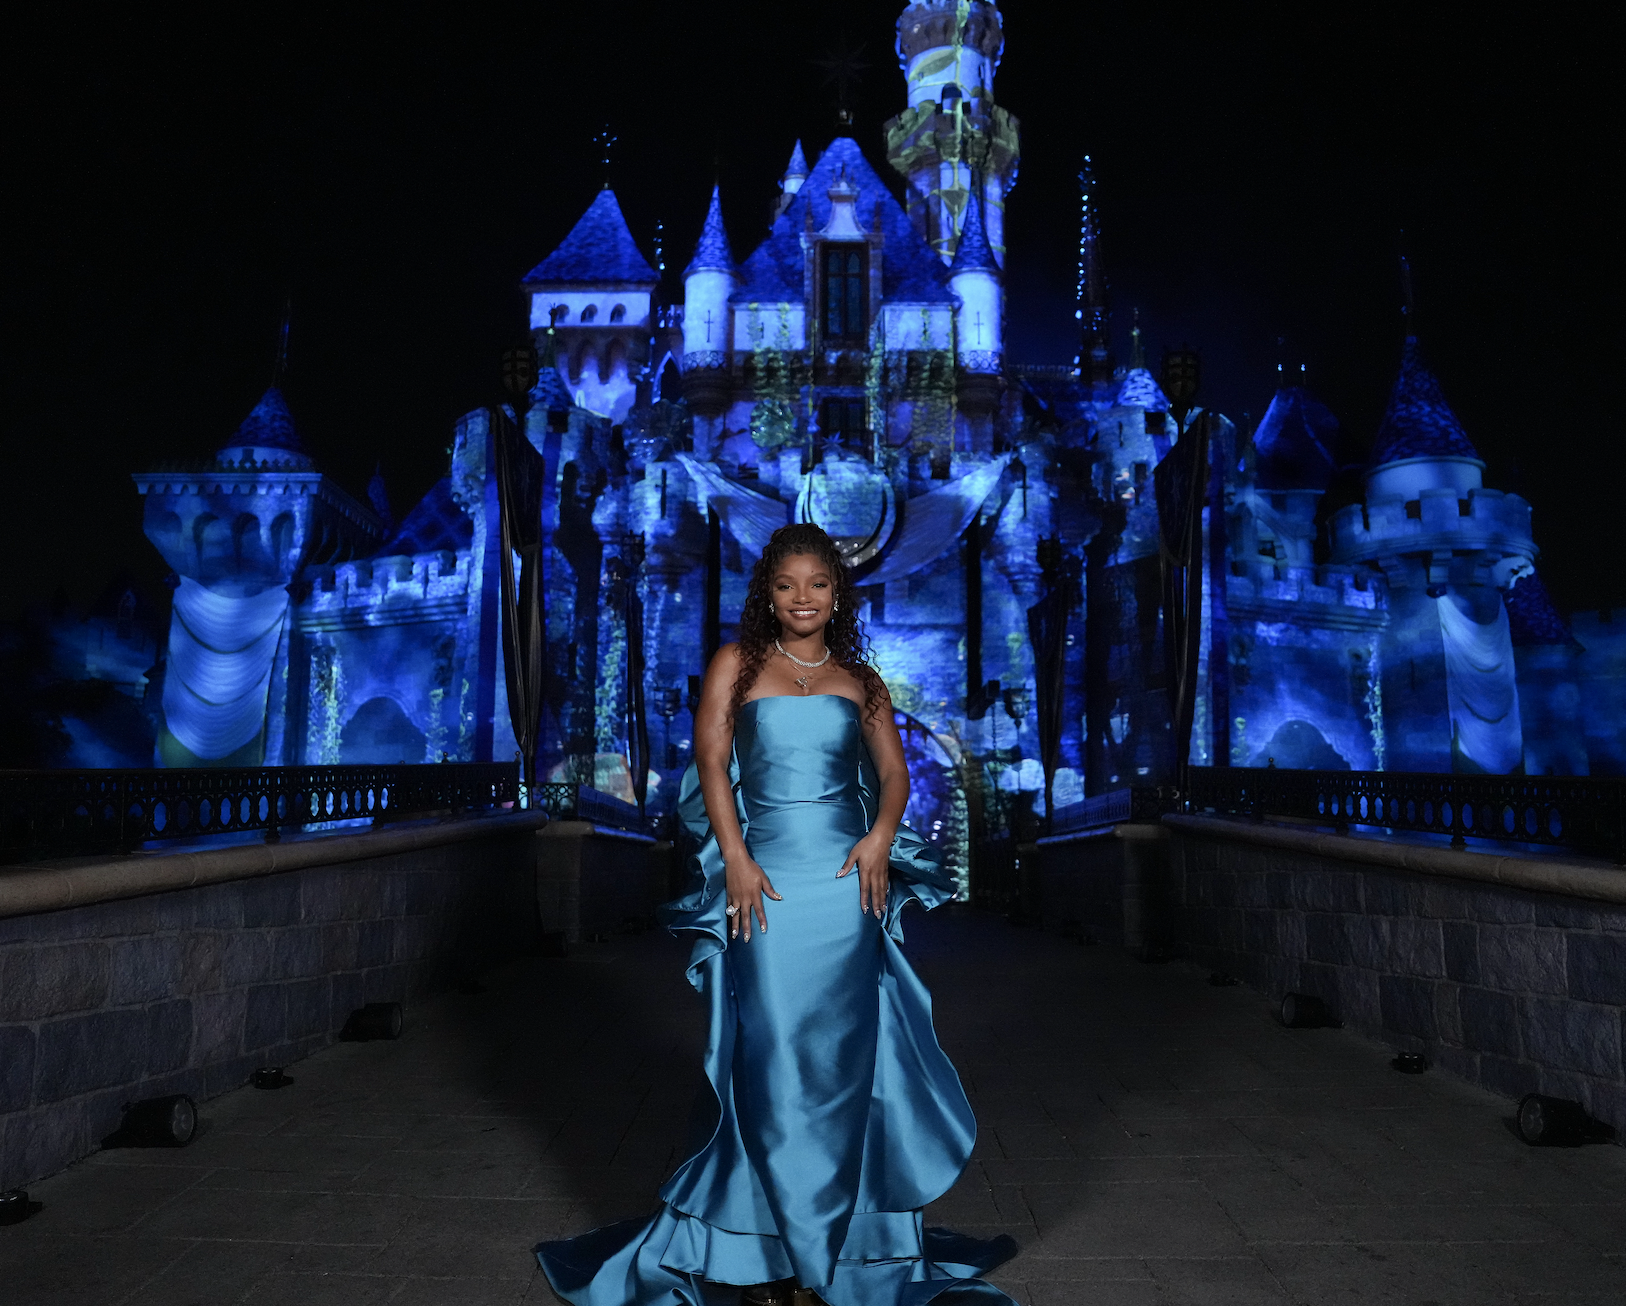 Halle standing in front of the castle in a long shiny strapless dress